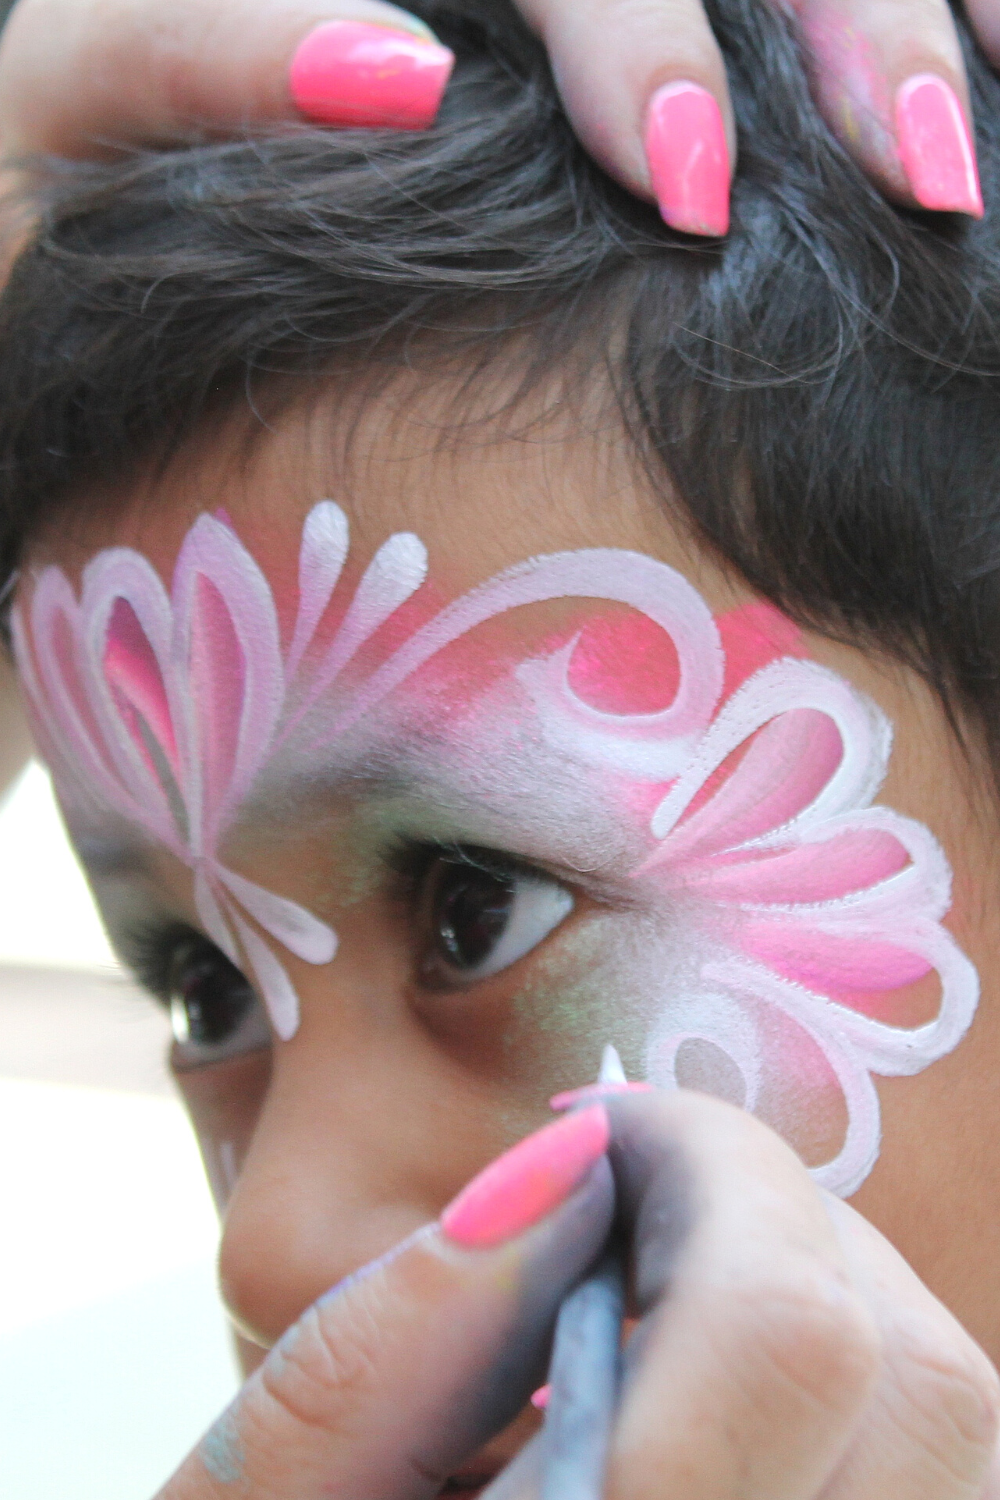 a child gets their face painting with a pink design at disney world